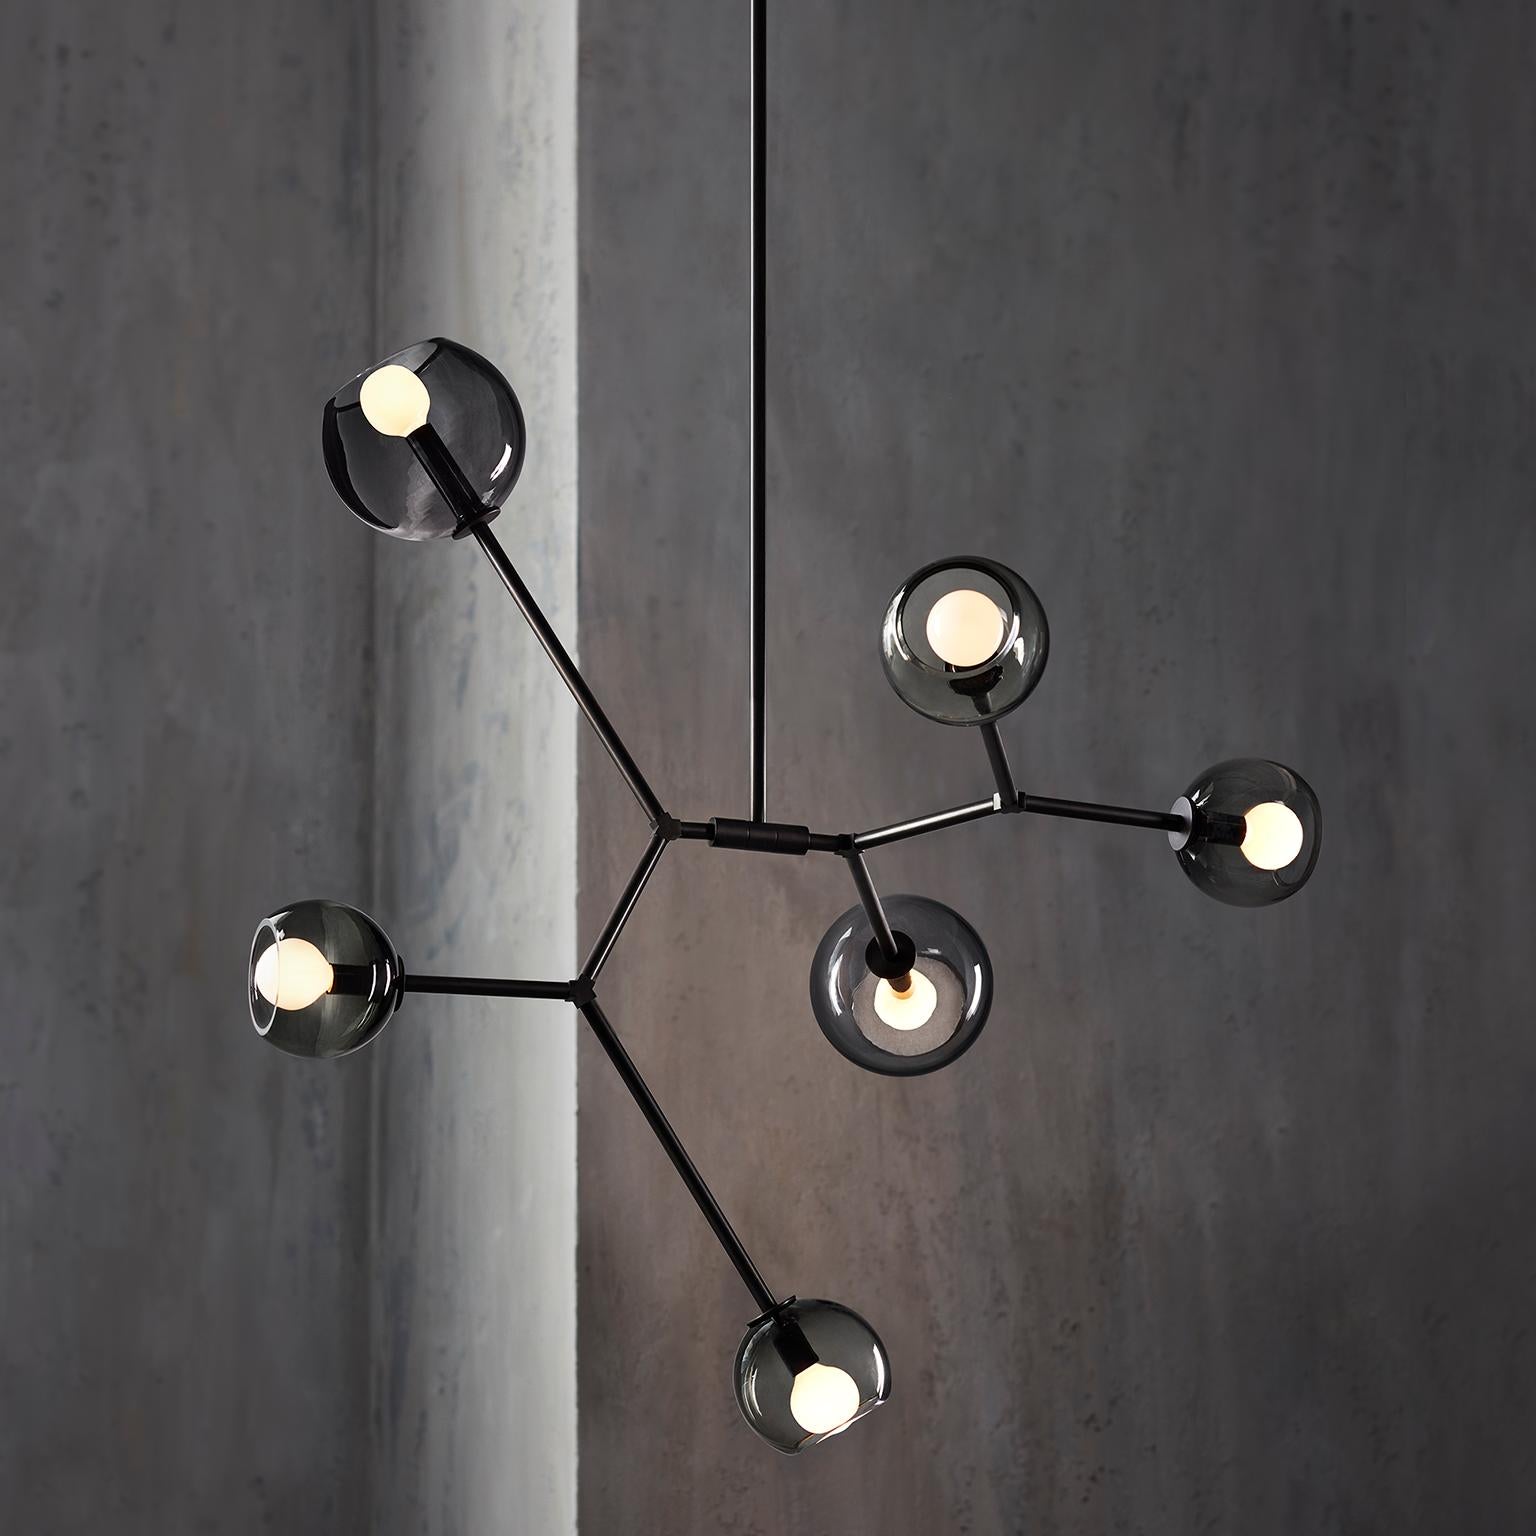 Shift embraces the air with a free floating form and open gesture. Blown-glass spheres balance vertically and horizontally creating a light, graceful composition. 

All of our fixtures are made by hand in Toronto, Canada.

UL, UL-C approved.